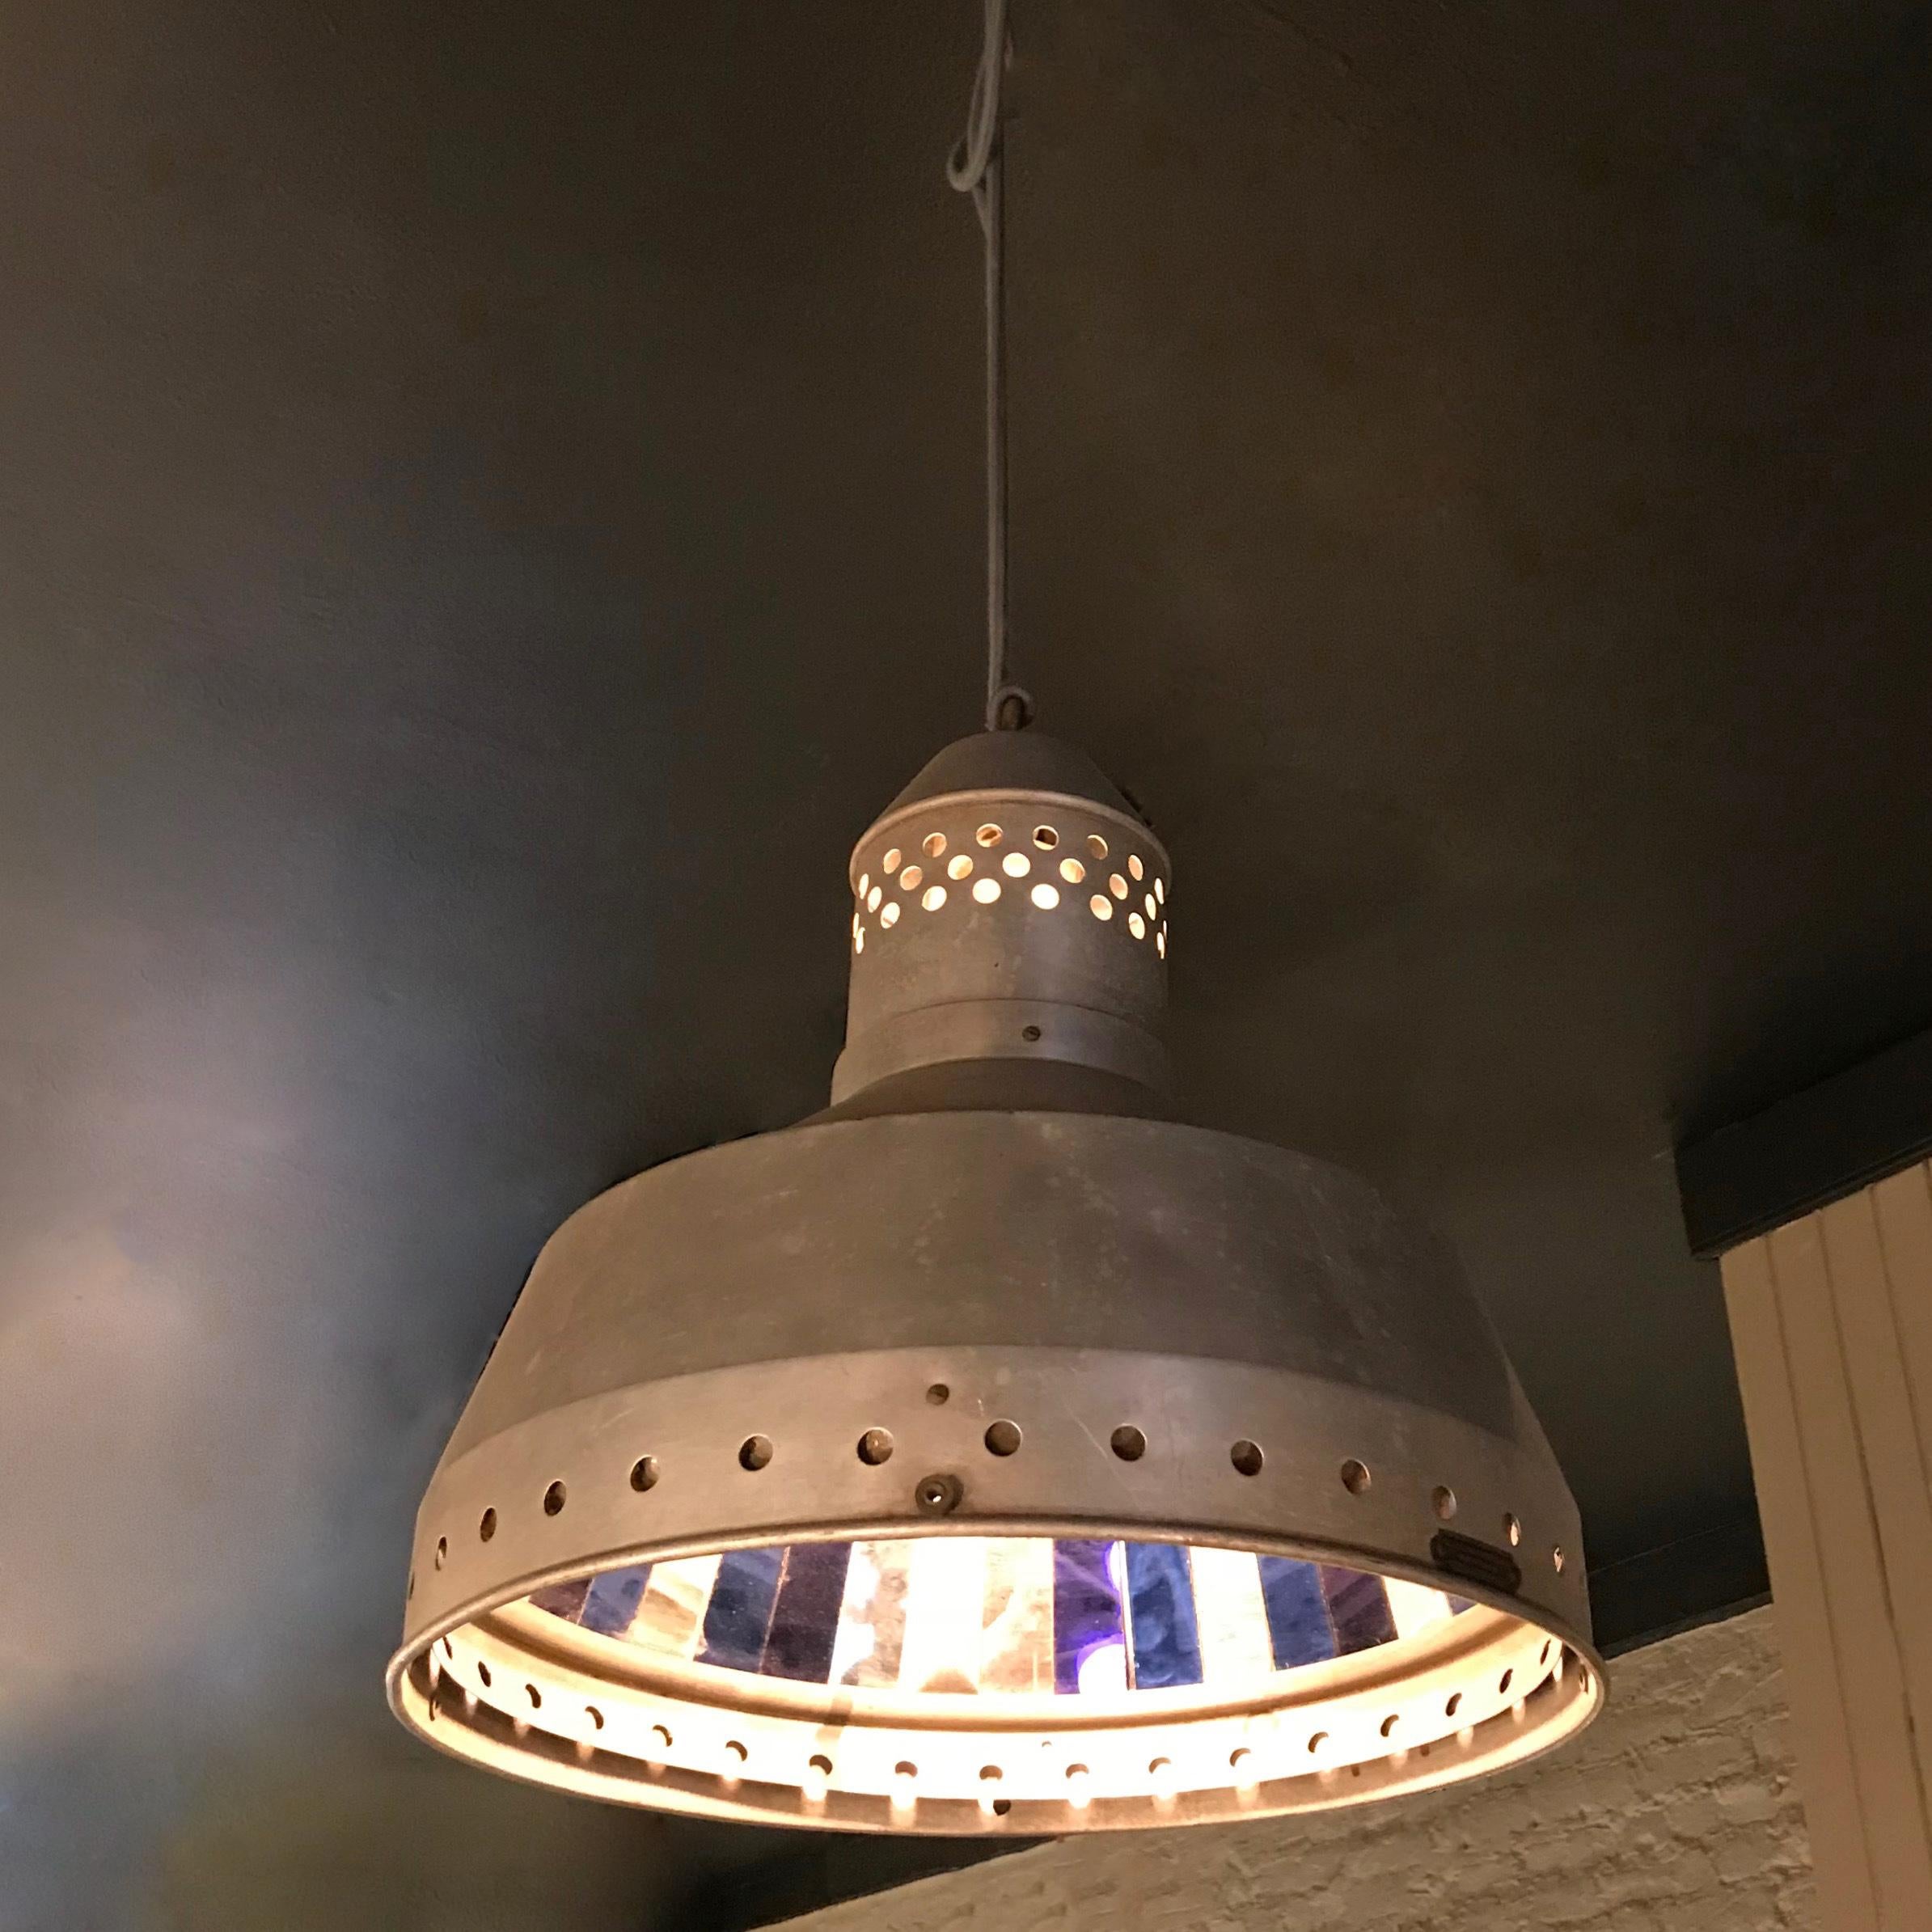 Outstanding, early 20th century, industrial, factory pendant light features a perforated aluminum shade with a faceted mirror interior of alternating blue and clear mirror strips. The pendant is wired with 40 inches of cord to accept up to a 300